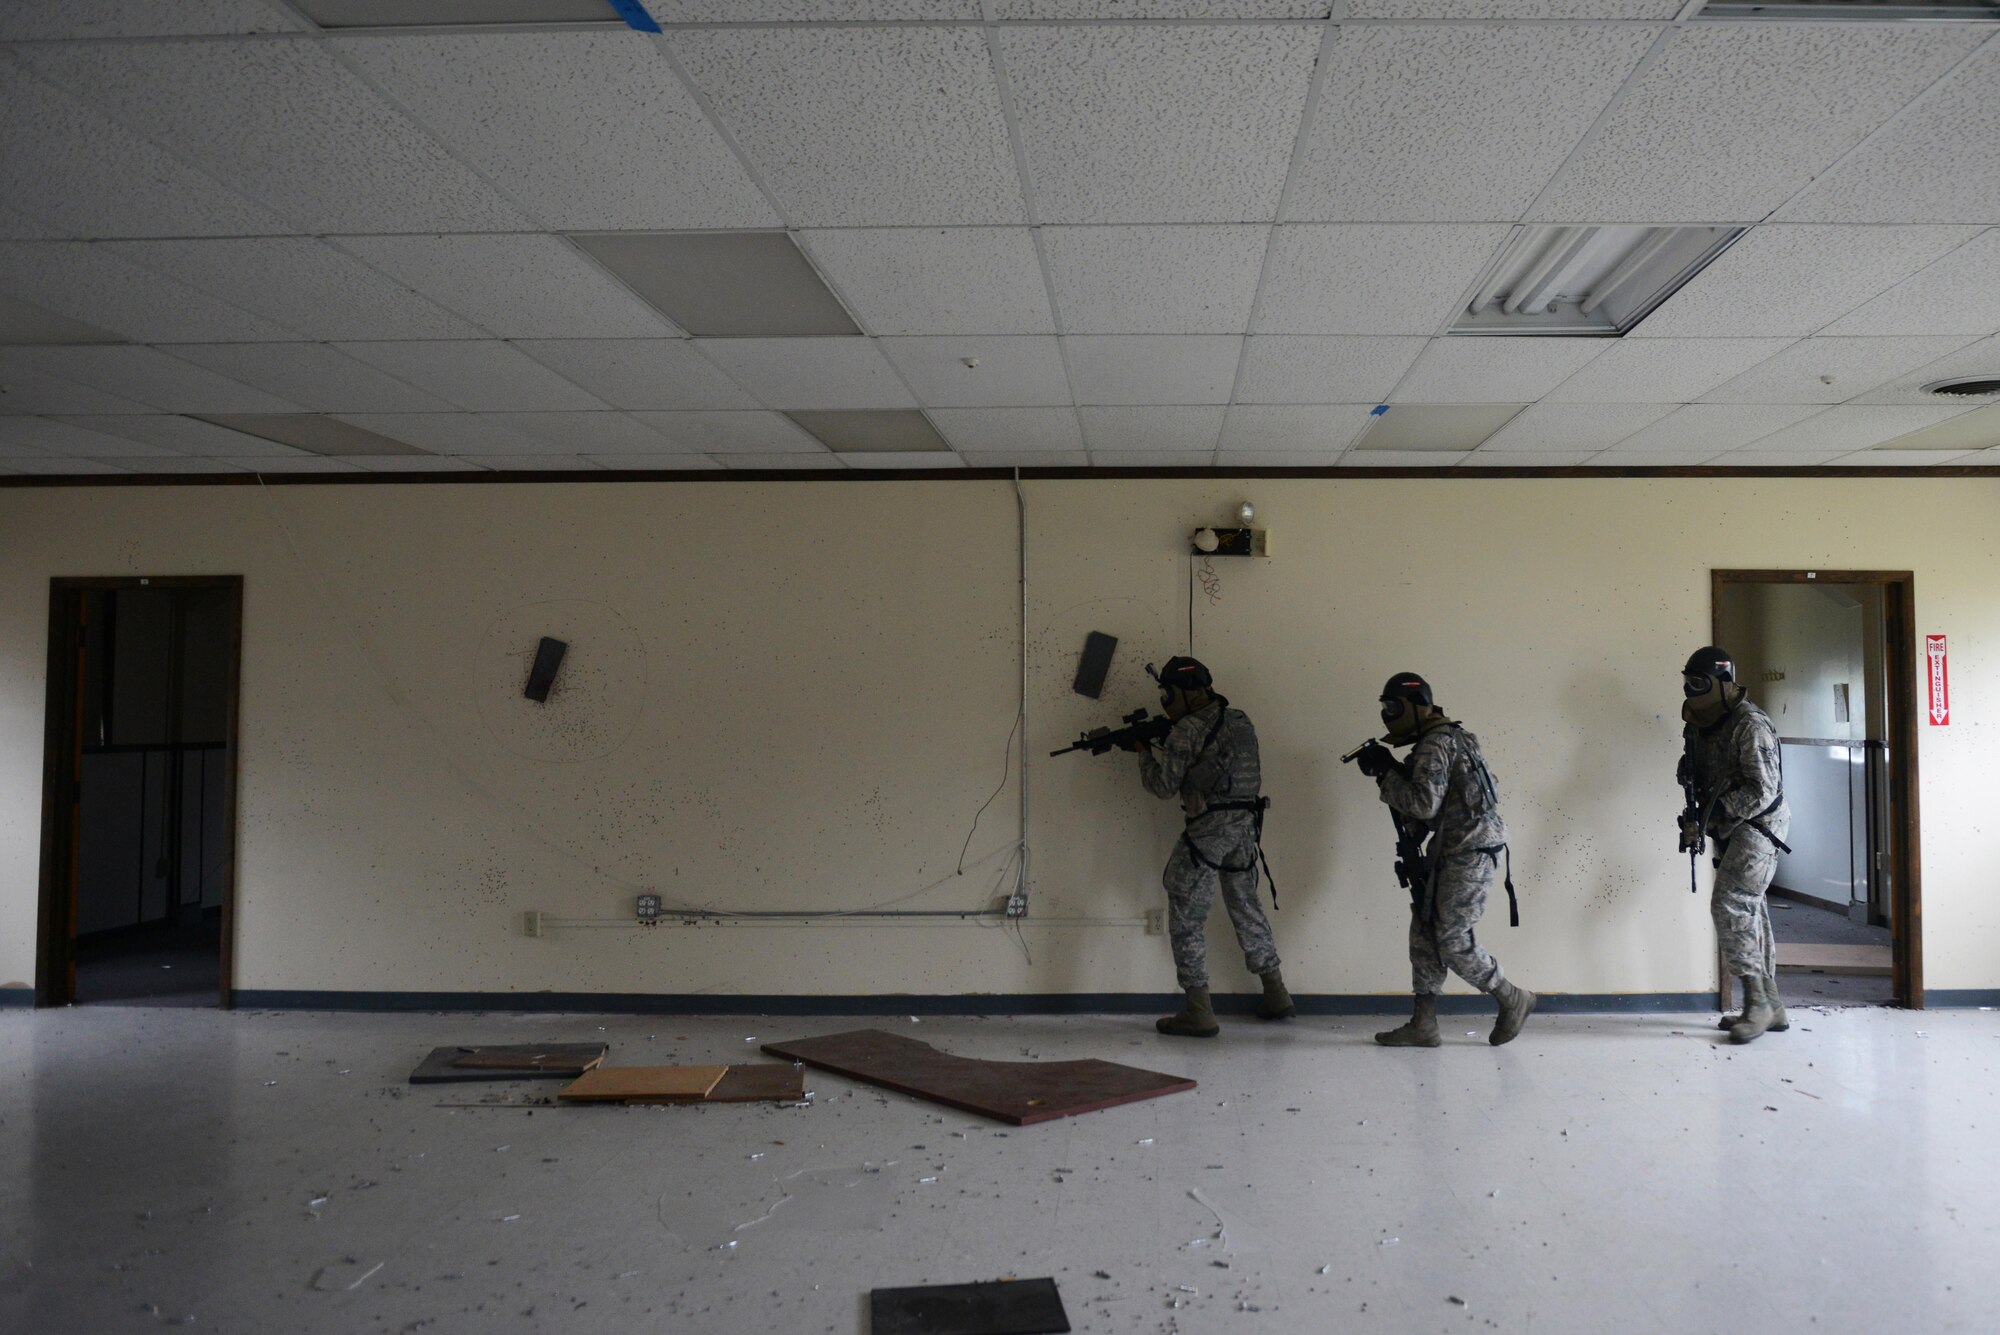 A team of 673d Security Forces Squadron members sweep a room during active-shooter training at Joint Base Elmendorf-Richardson, Alaska, July 18, 2017. Security forces trained in high-stress environments with hostages and aggressive perpetrators, so they learned how to appropriately respond and handle various hostile situations. 